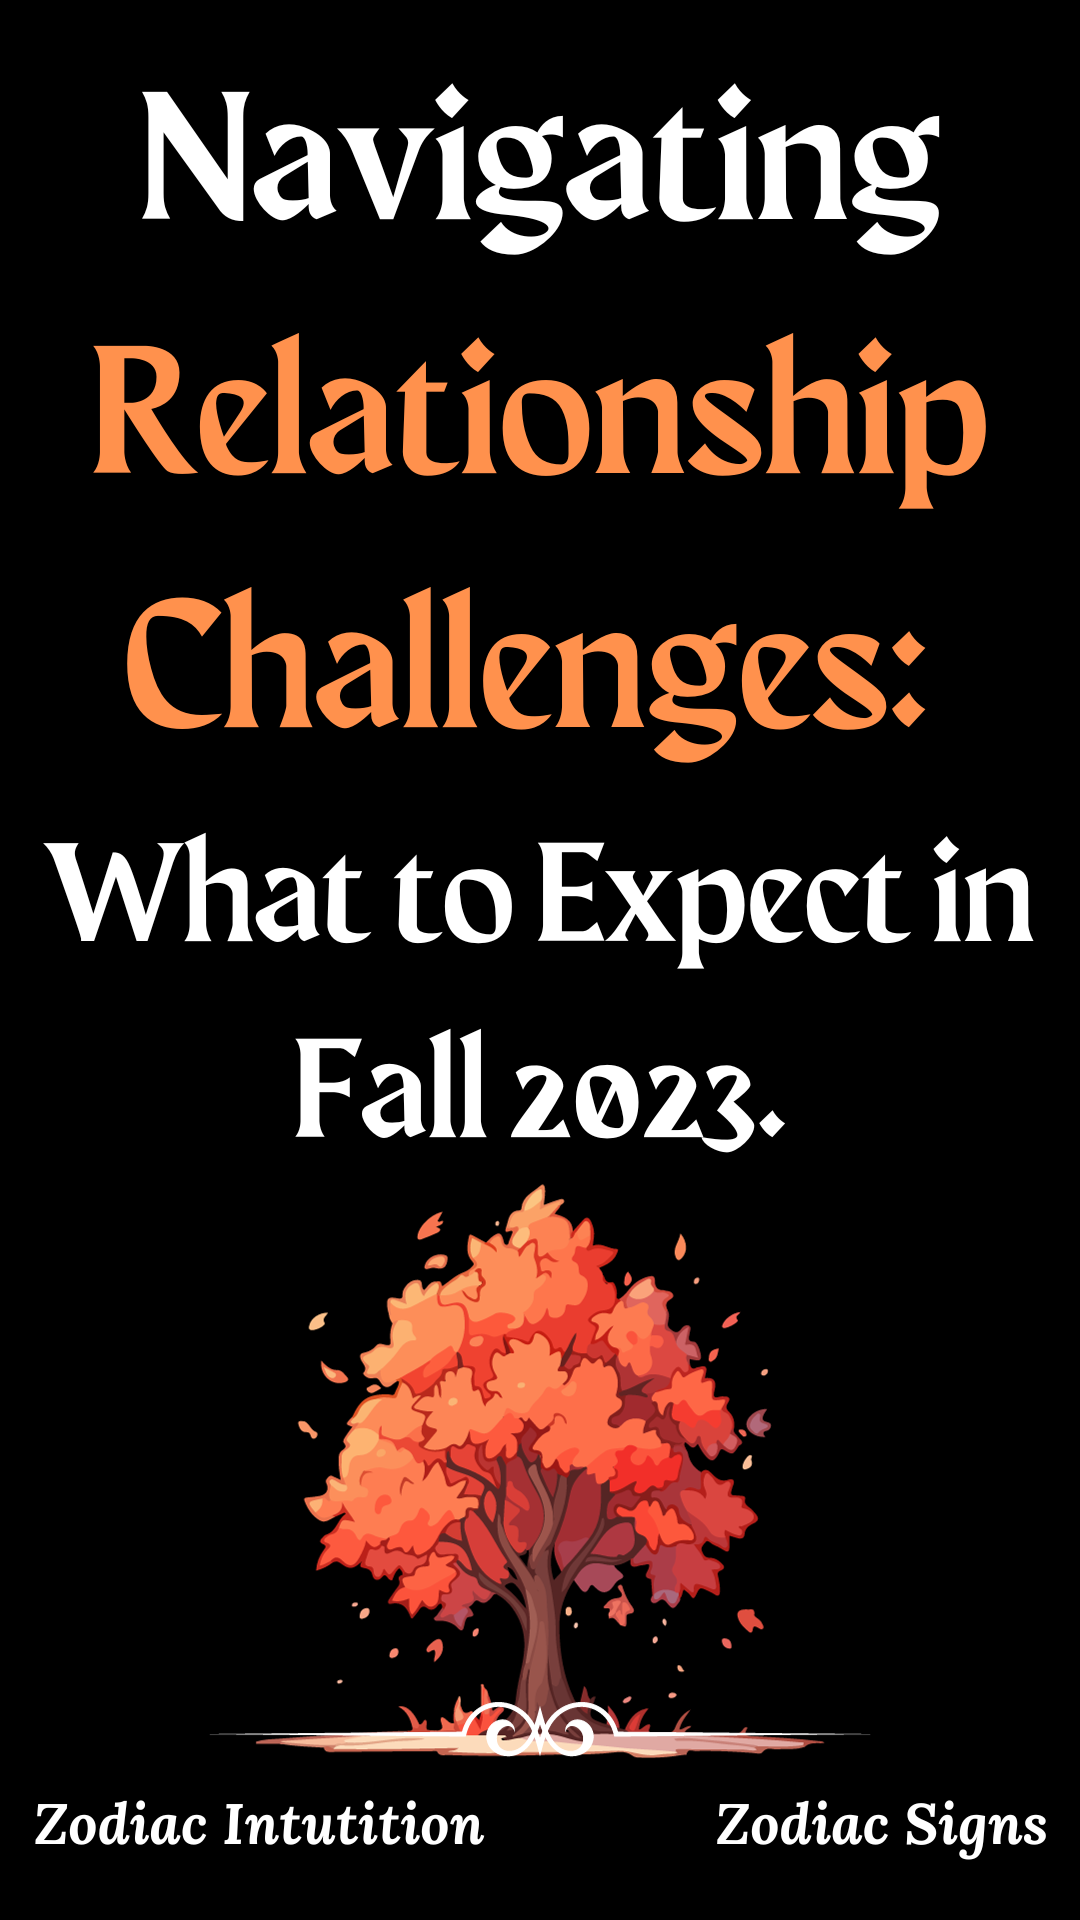 Navigating Relationship Challenges: What to Expect in Fall 2023.